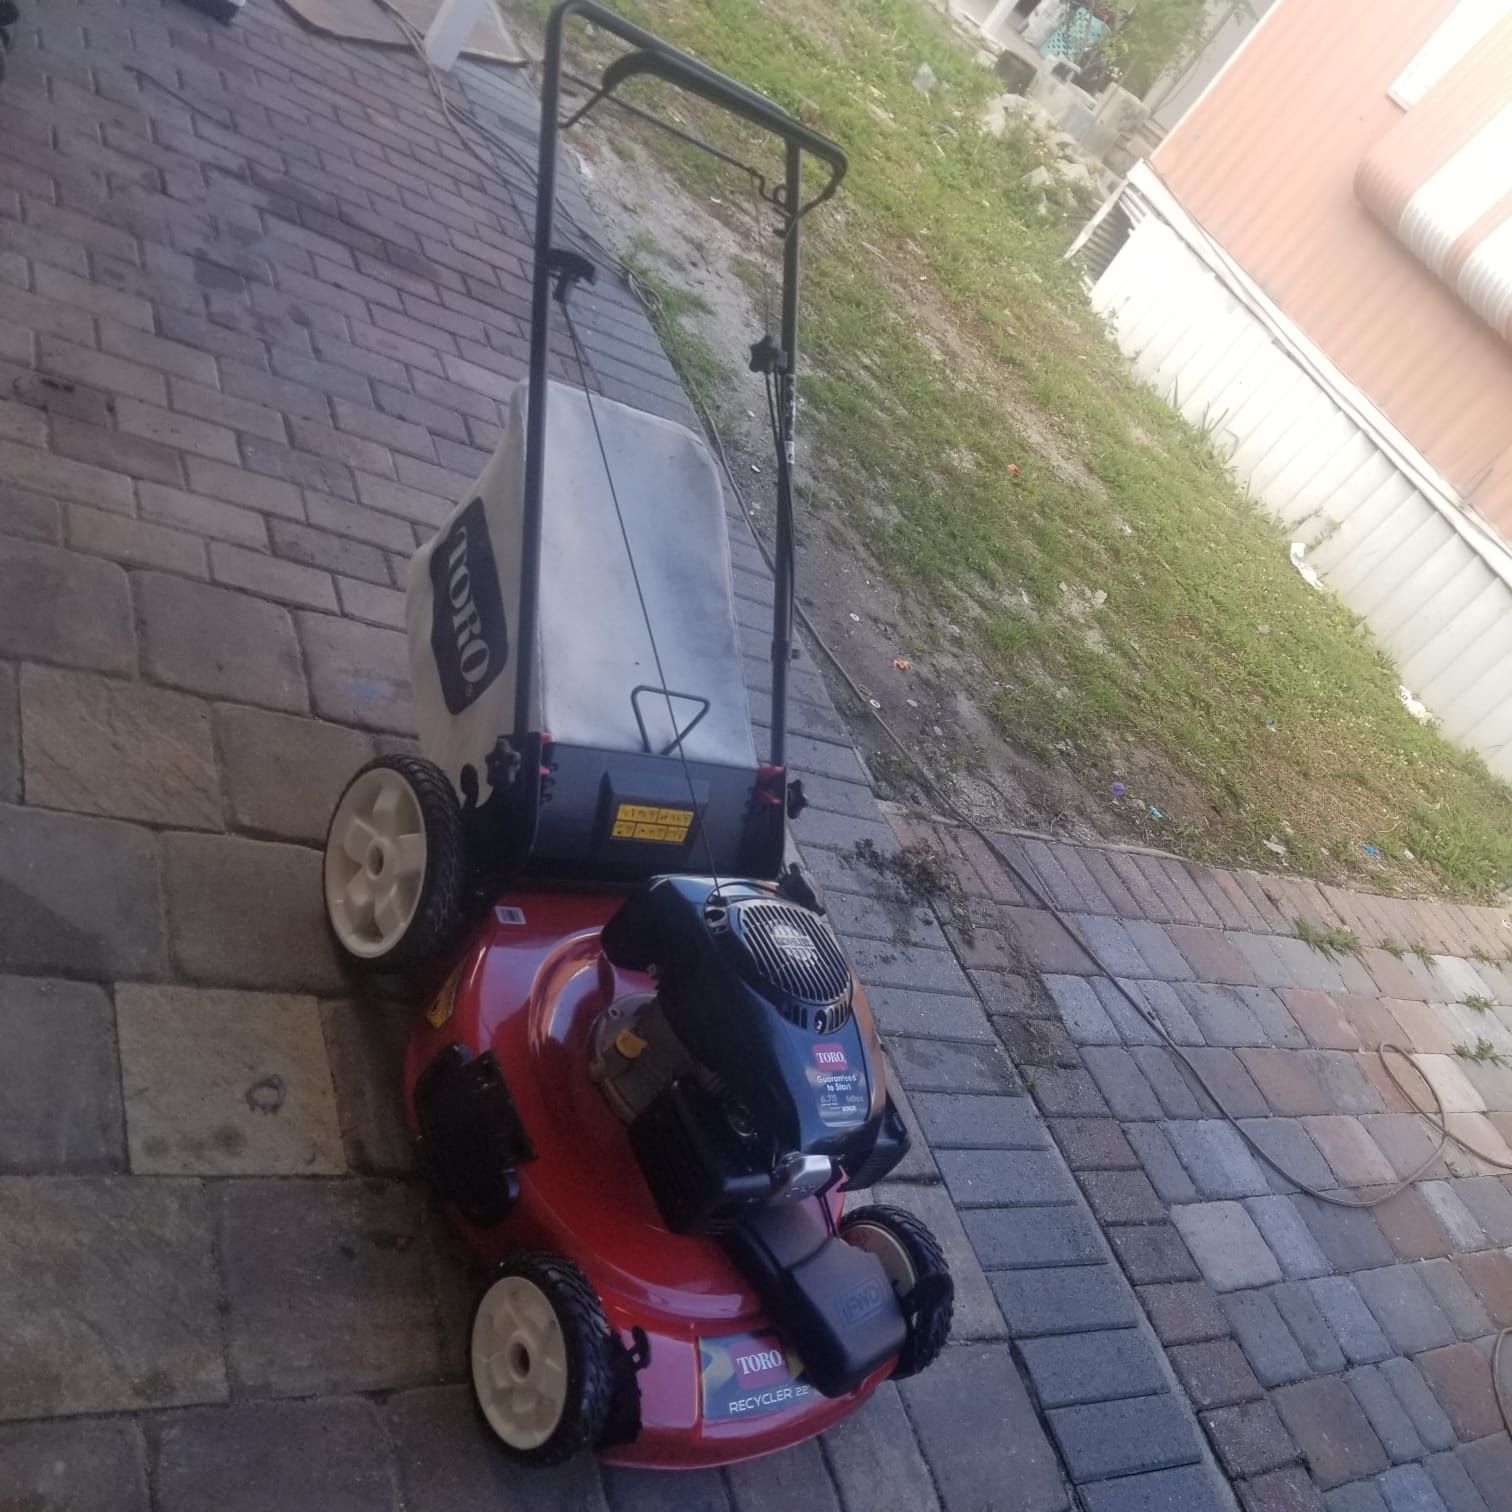 Toro lawn mower almost brand new used 2 times self propelled with bag